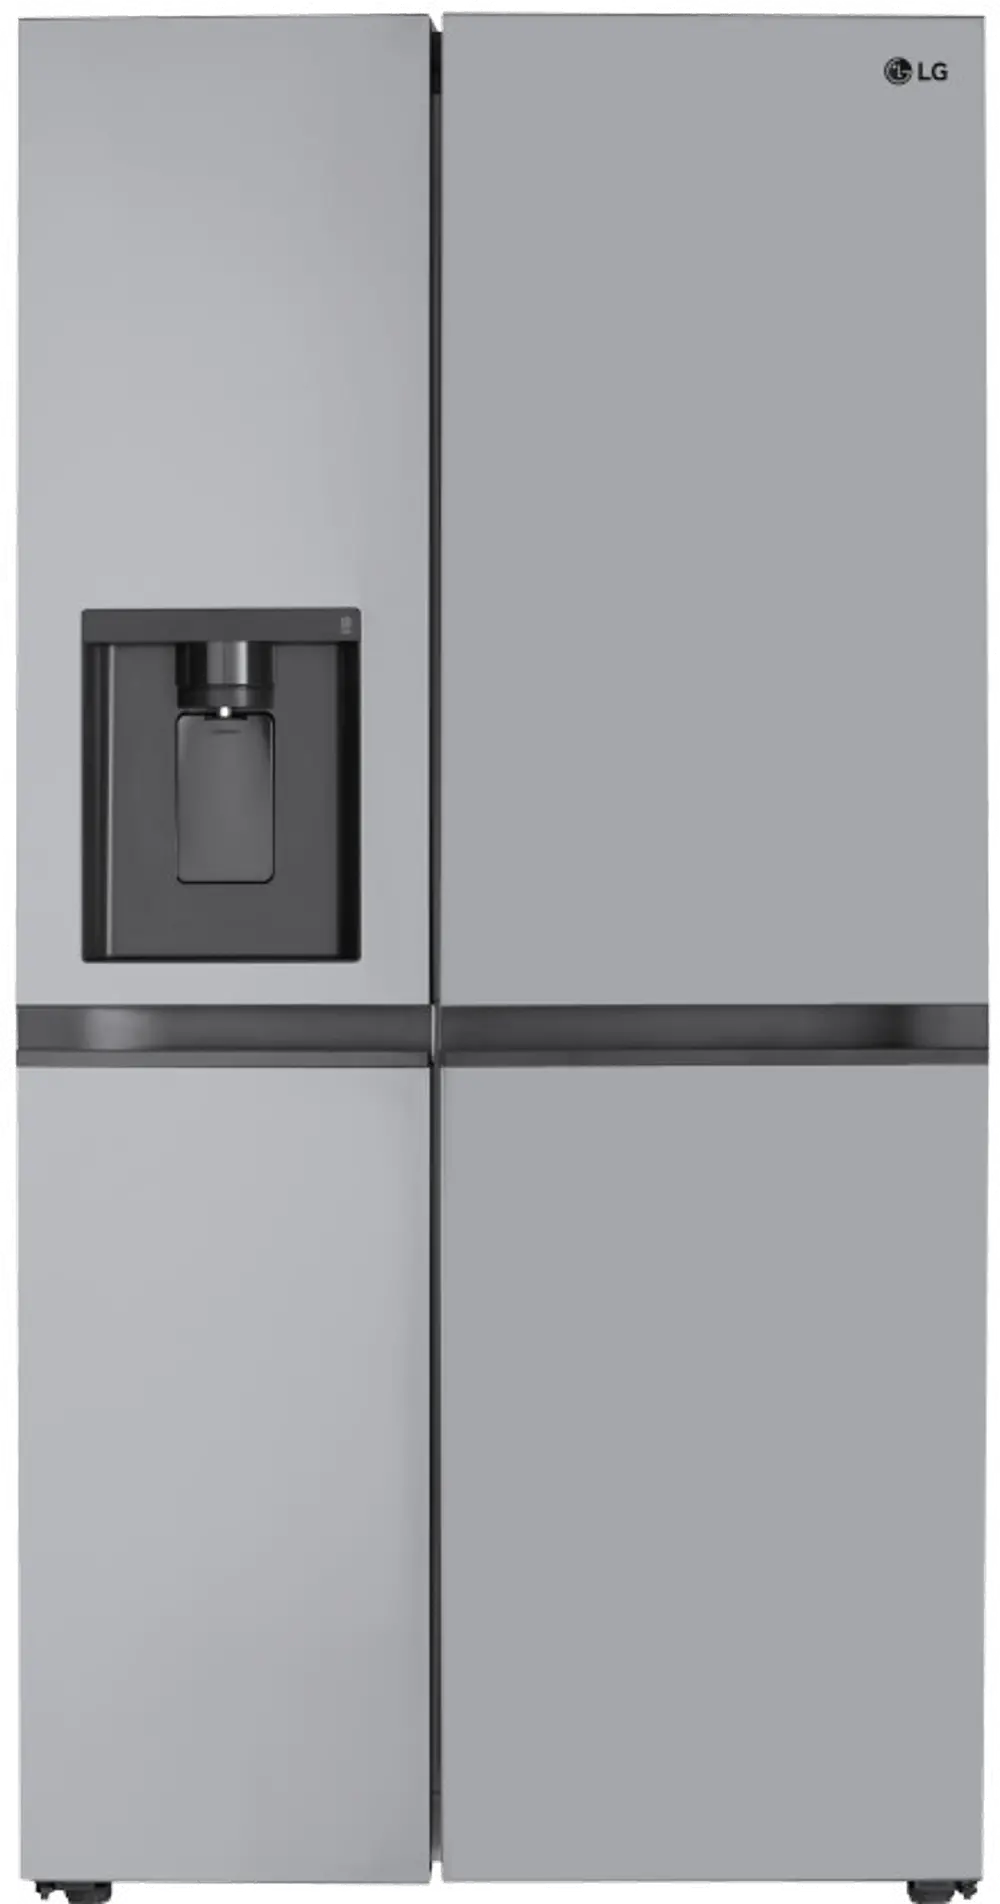 LRSWS2806S LG 27.6 cu ft Side by Side Refrigerator - Stainless Steel-1